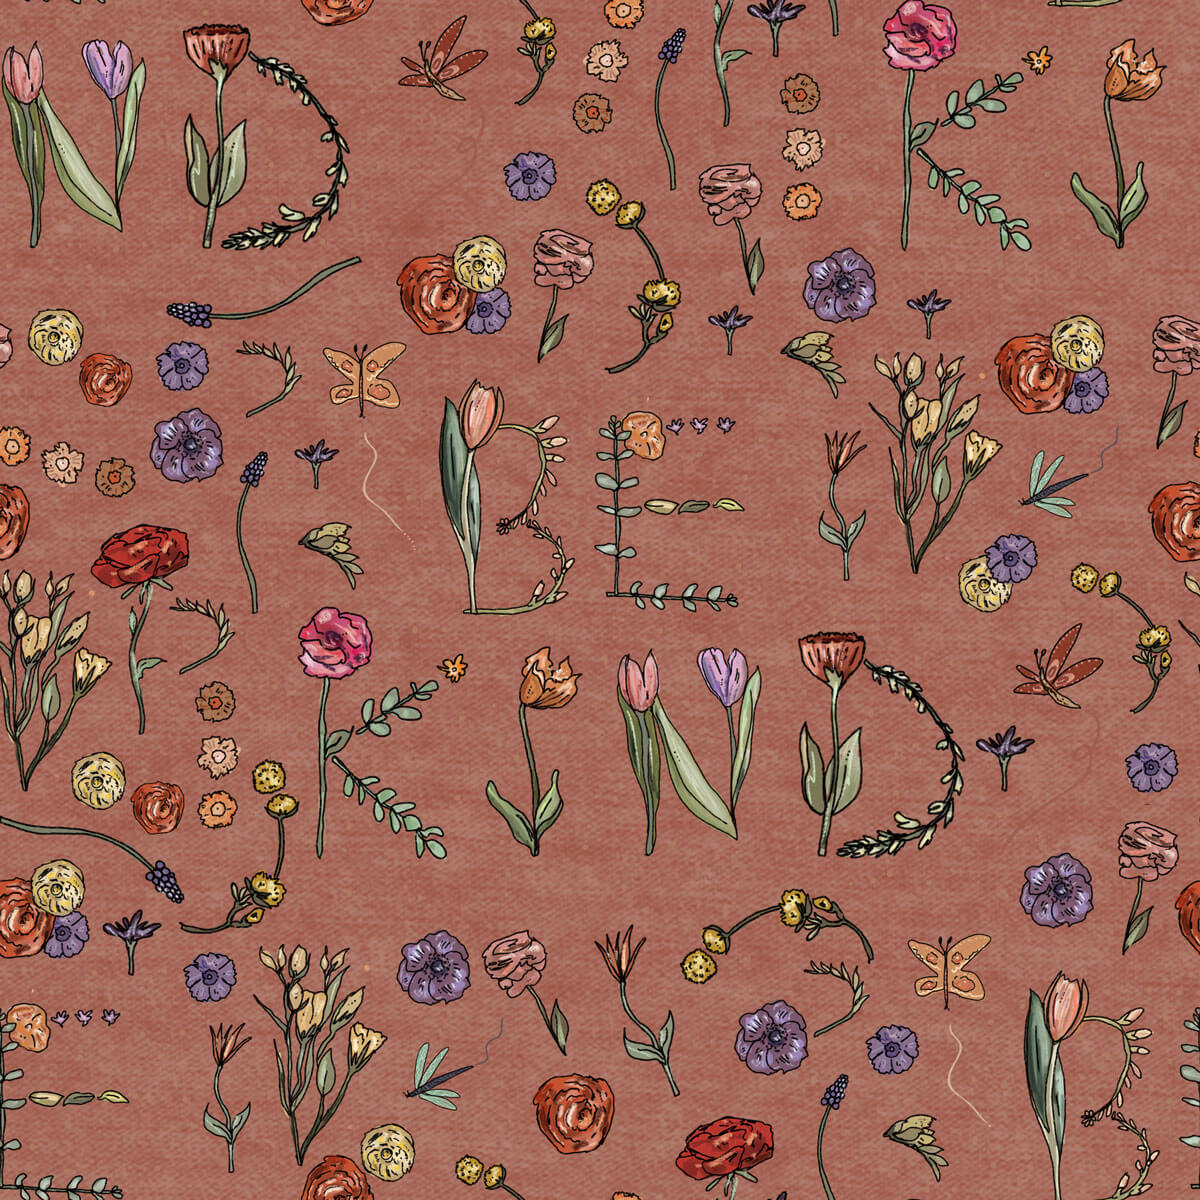 be-kind-pink-fabric